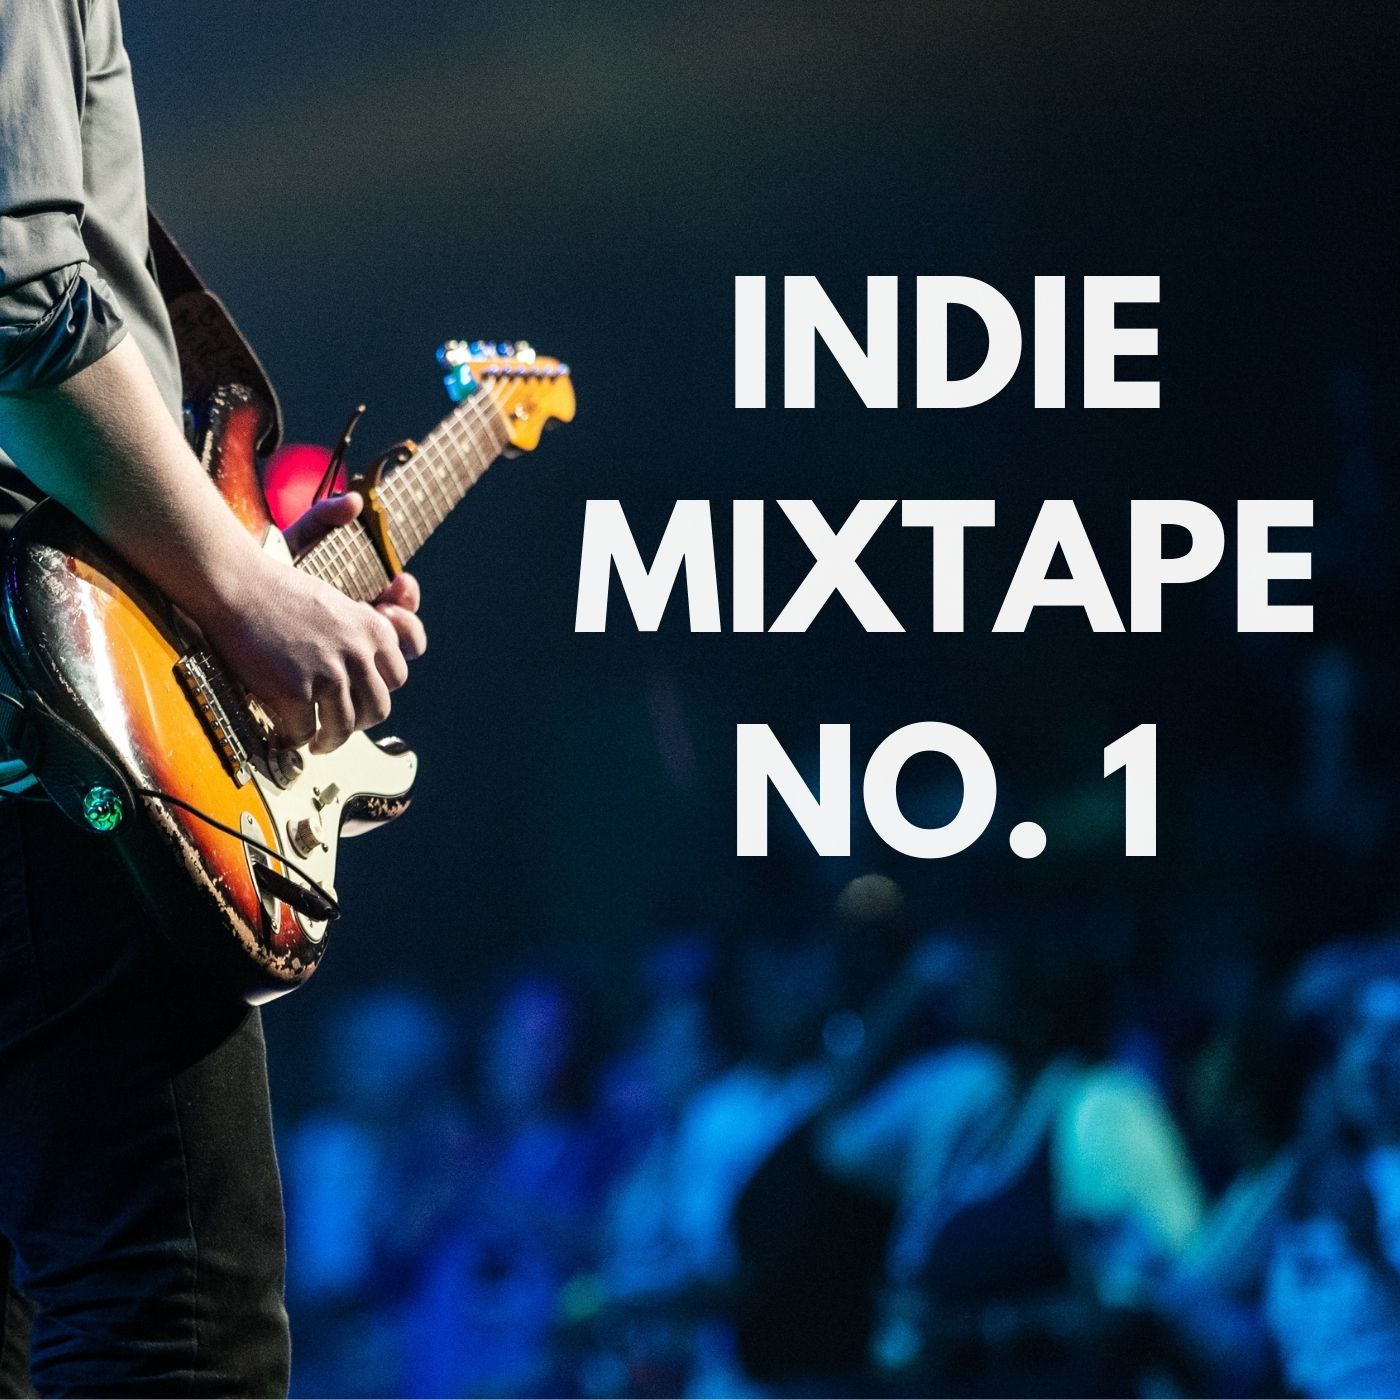 Indie Mixtape No. 1 Spotify playlist cover